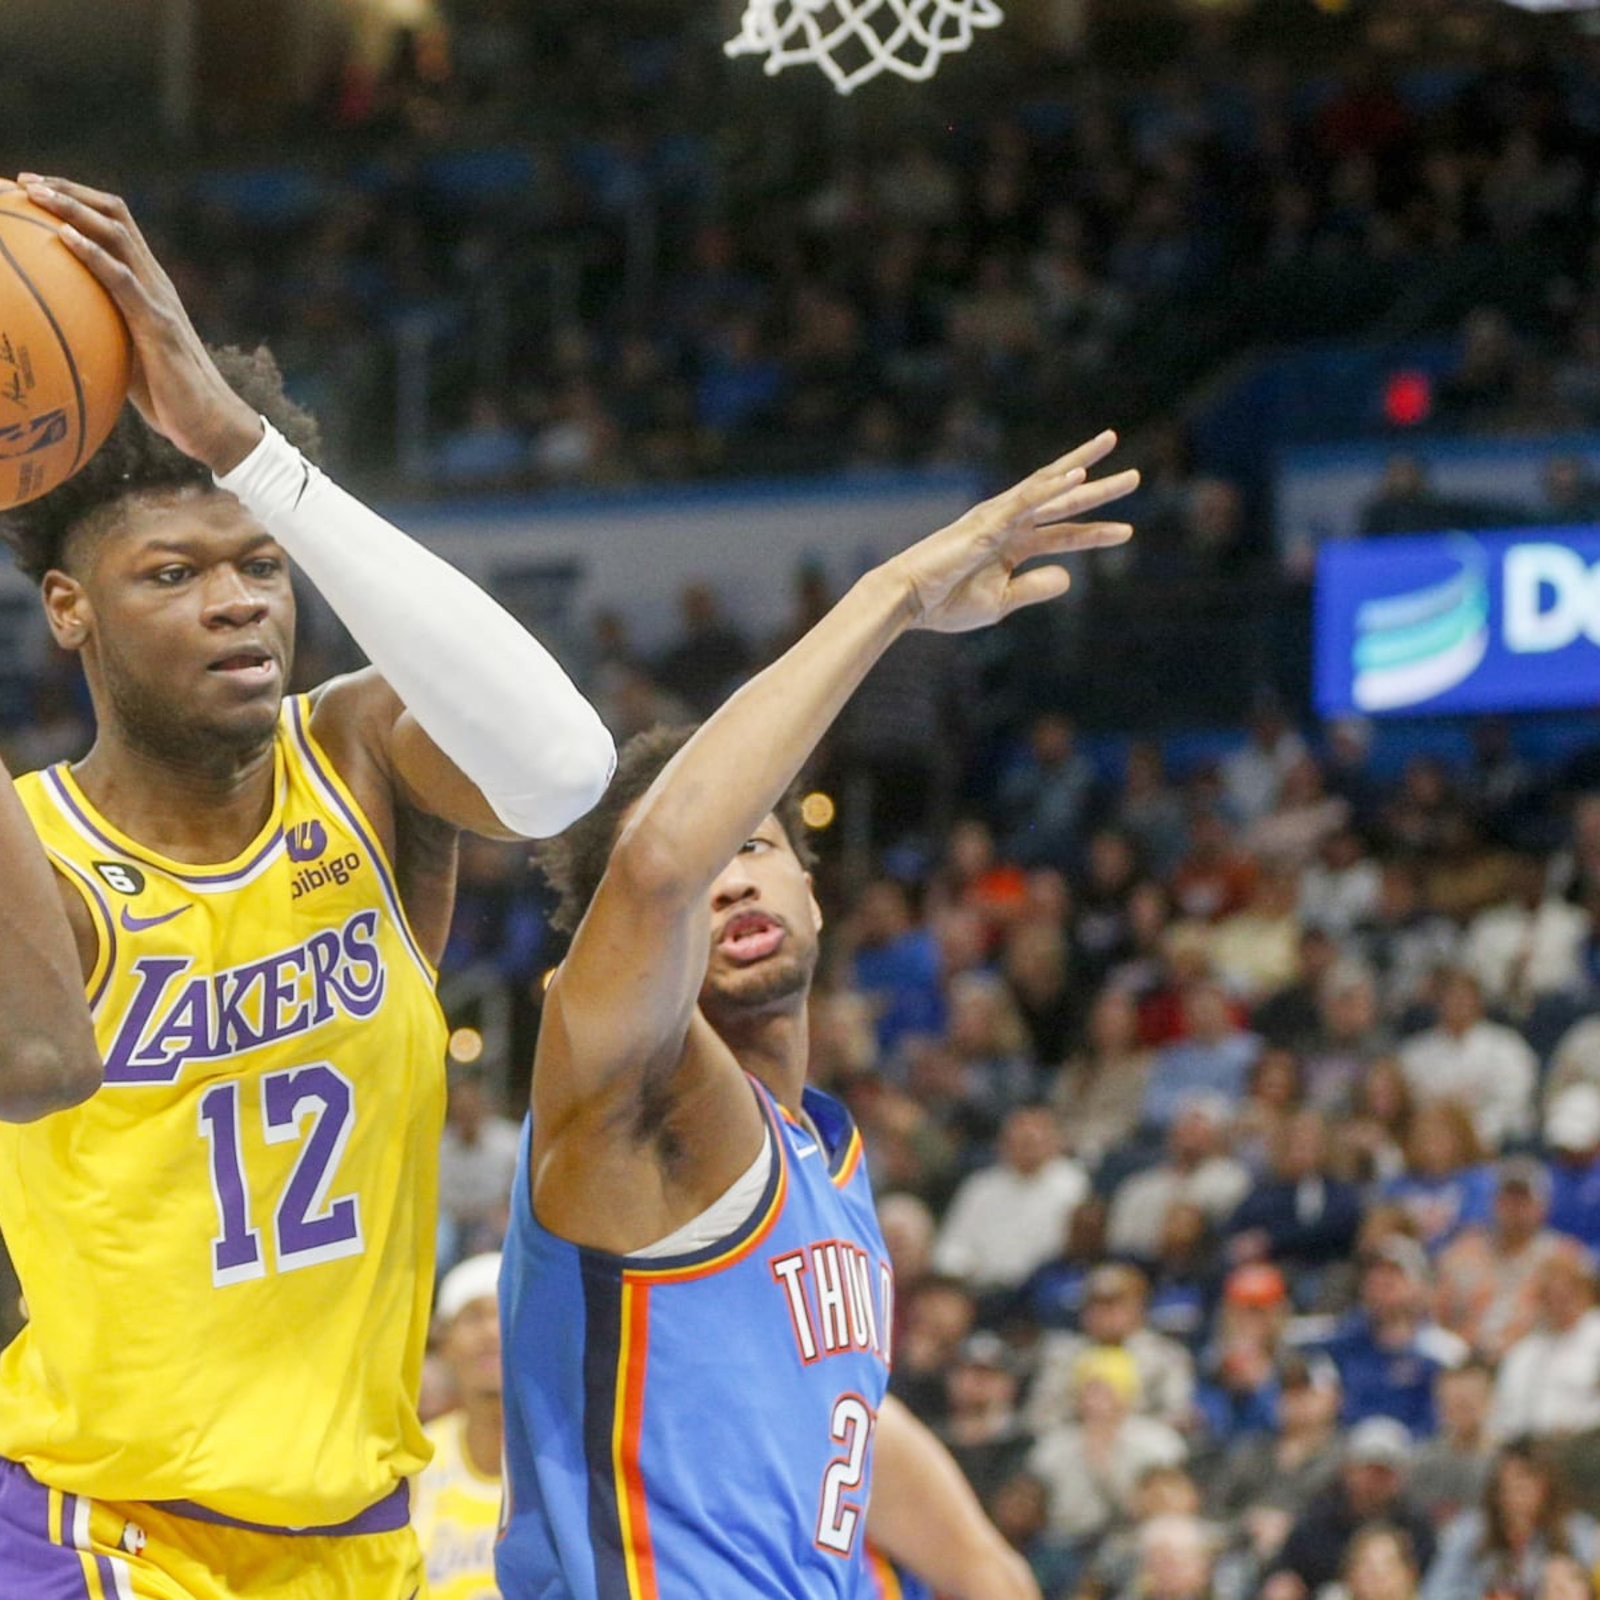 Lakers want to add another center — possibly Mo Bamba or Tristan